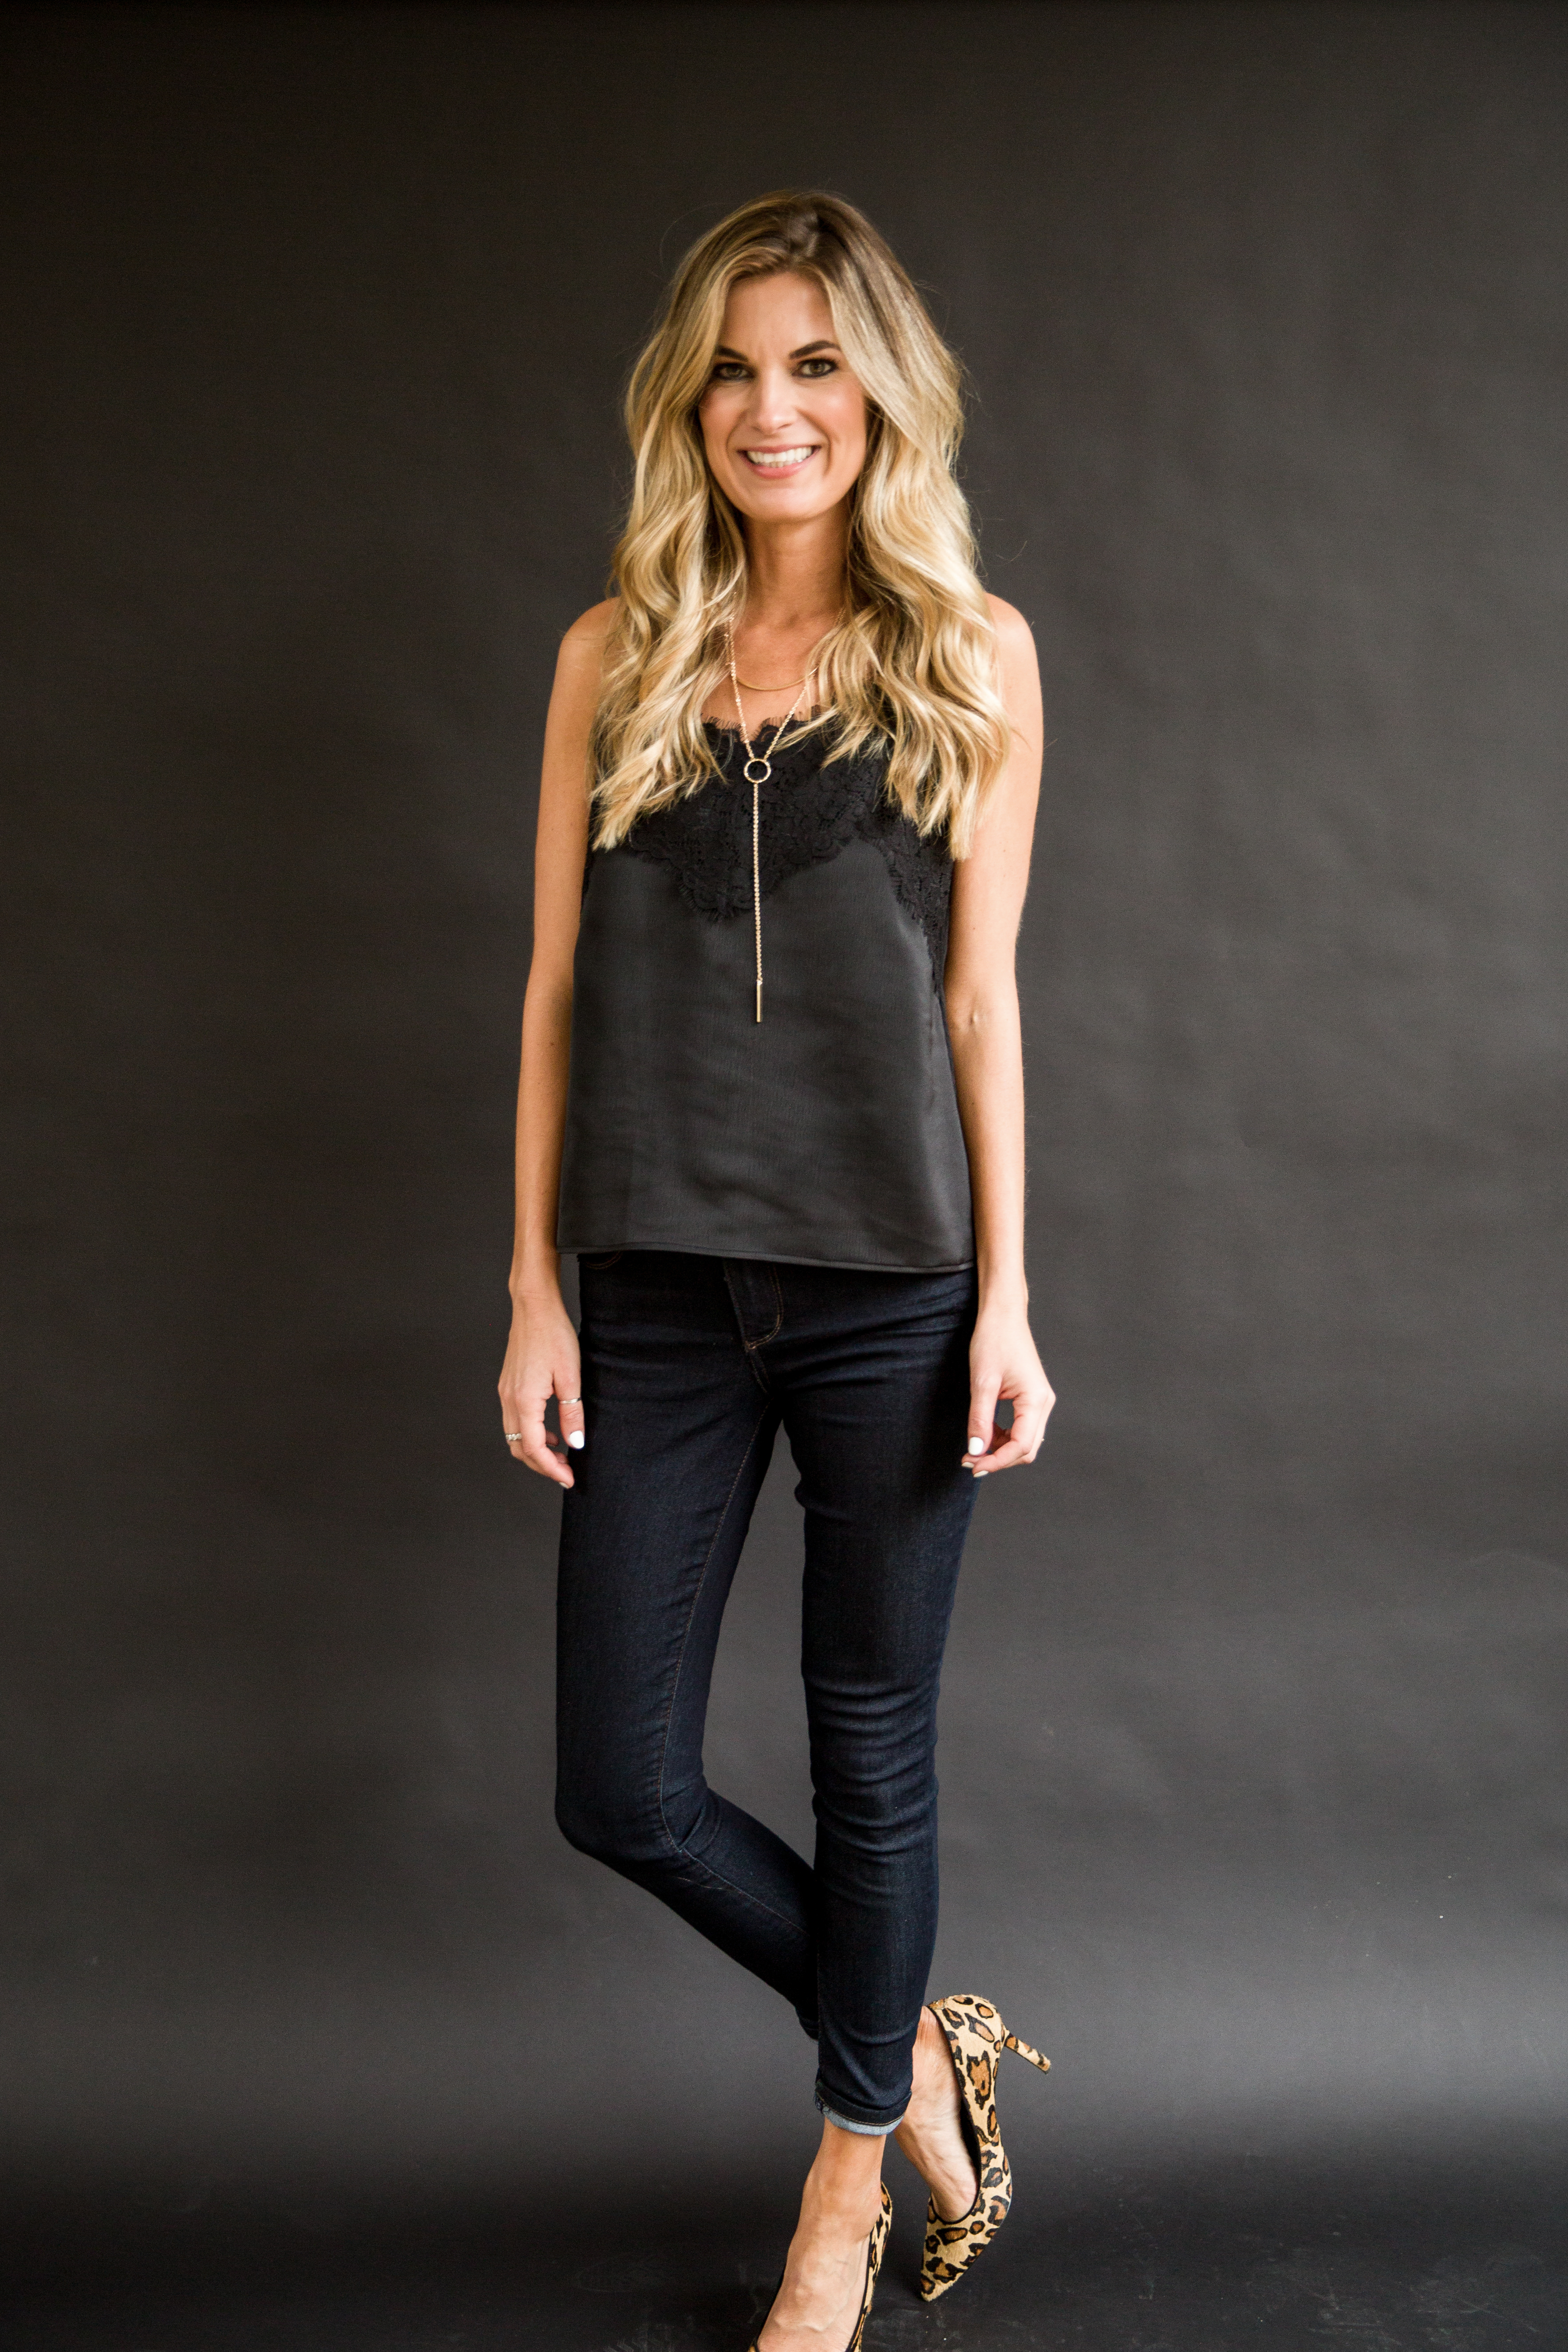  holiday outfit ideas from the gibson glam collection - the rachel cami in black